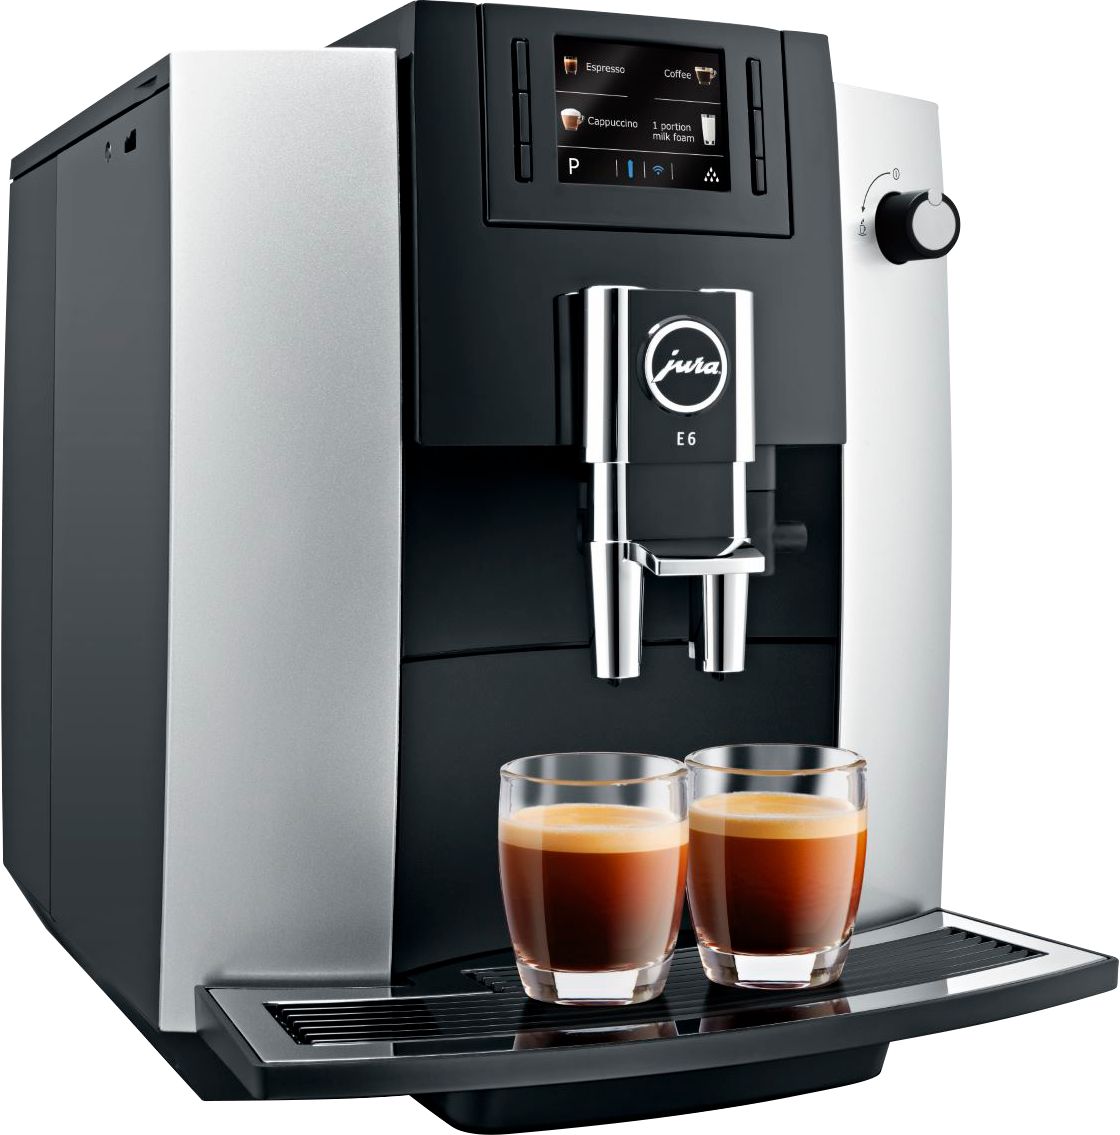 Left View: De'Longhi - Magnifica S Espresso Machine with 15 bars of pressure and intergrated grinder - Silver/Black